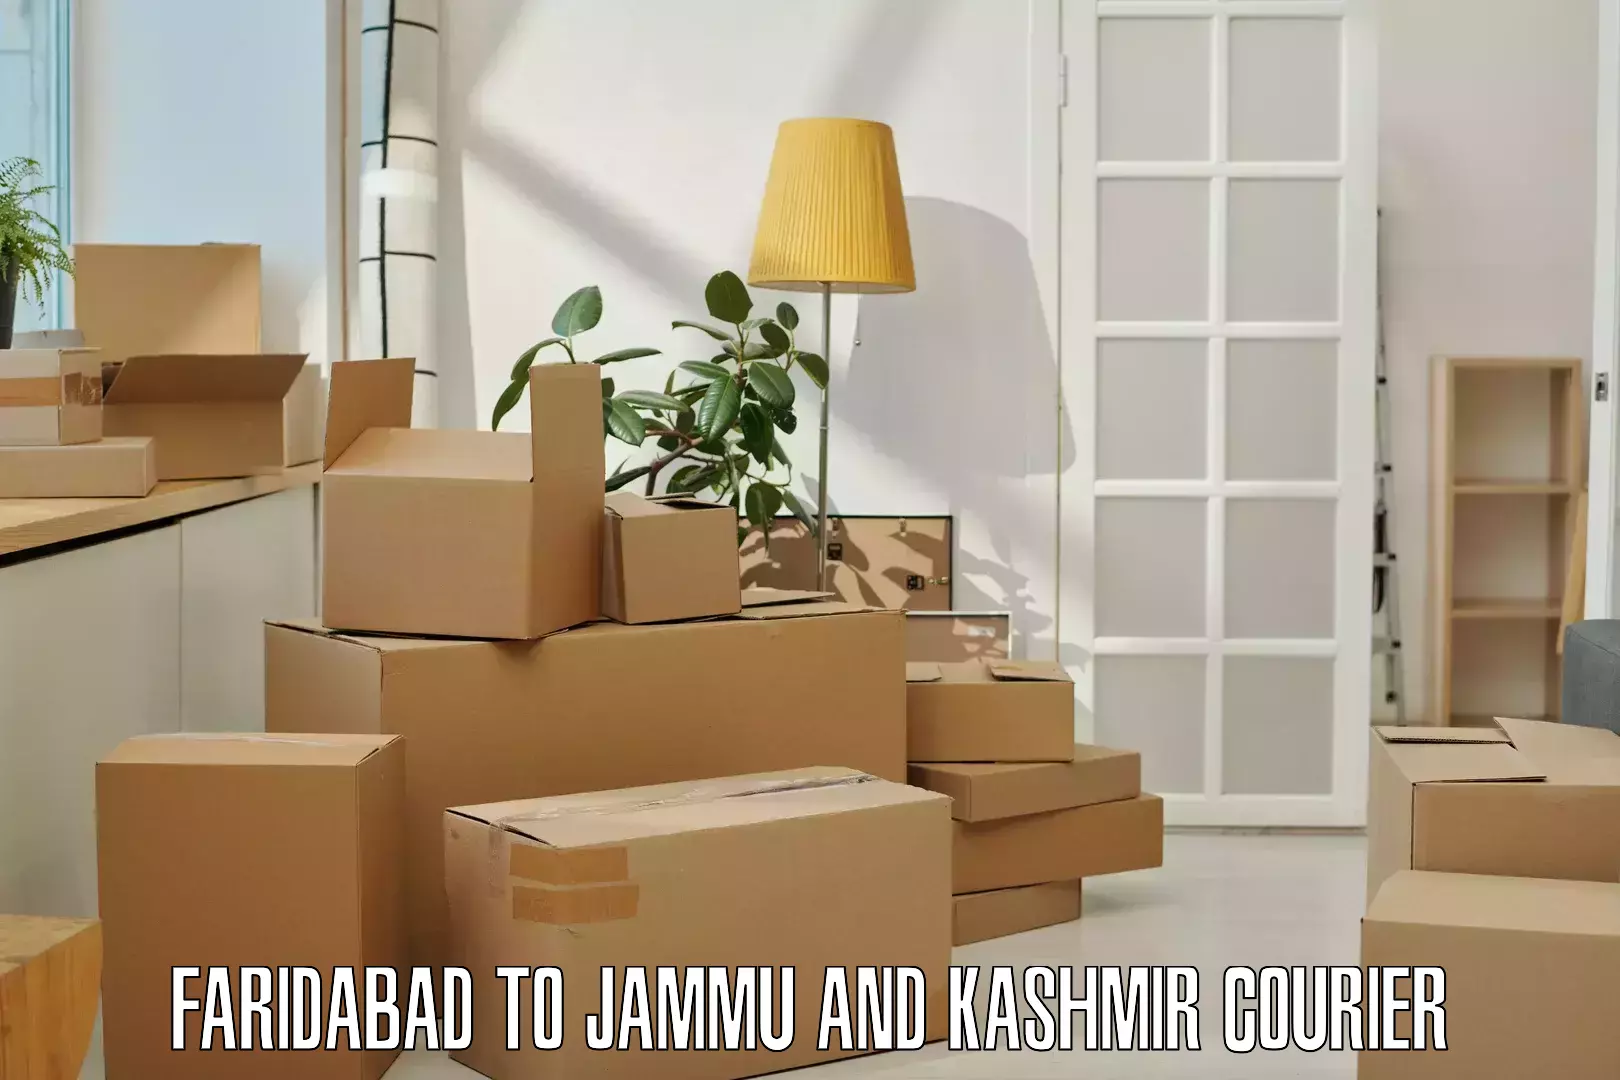 Overnight delivery services Faridabad to Baramulla